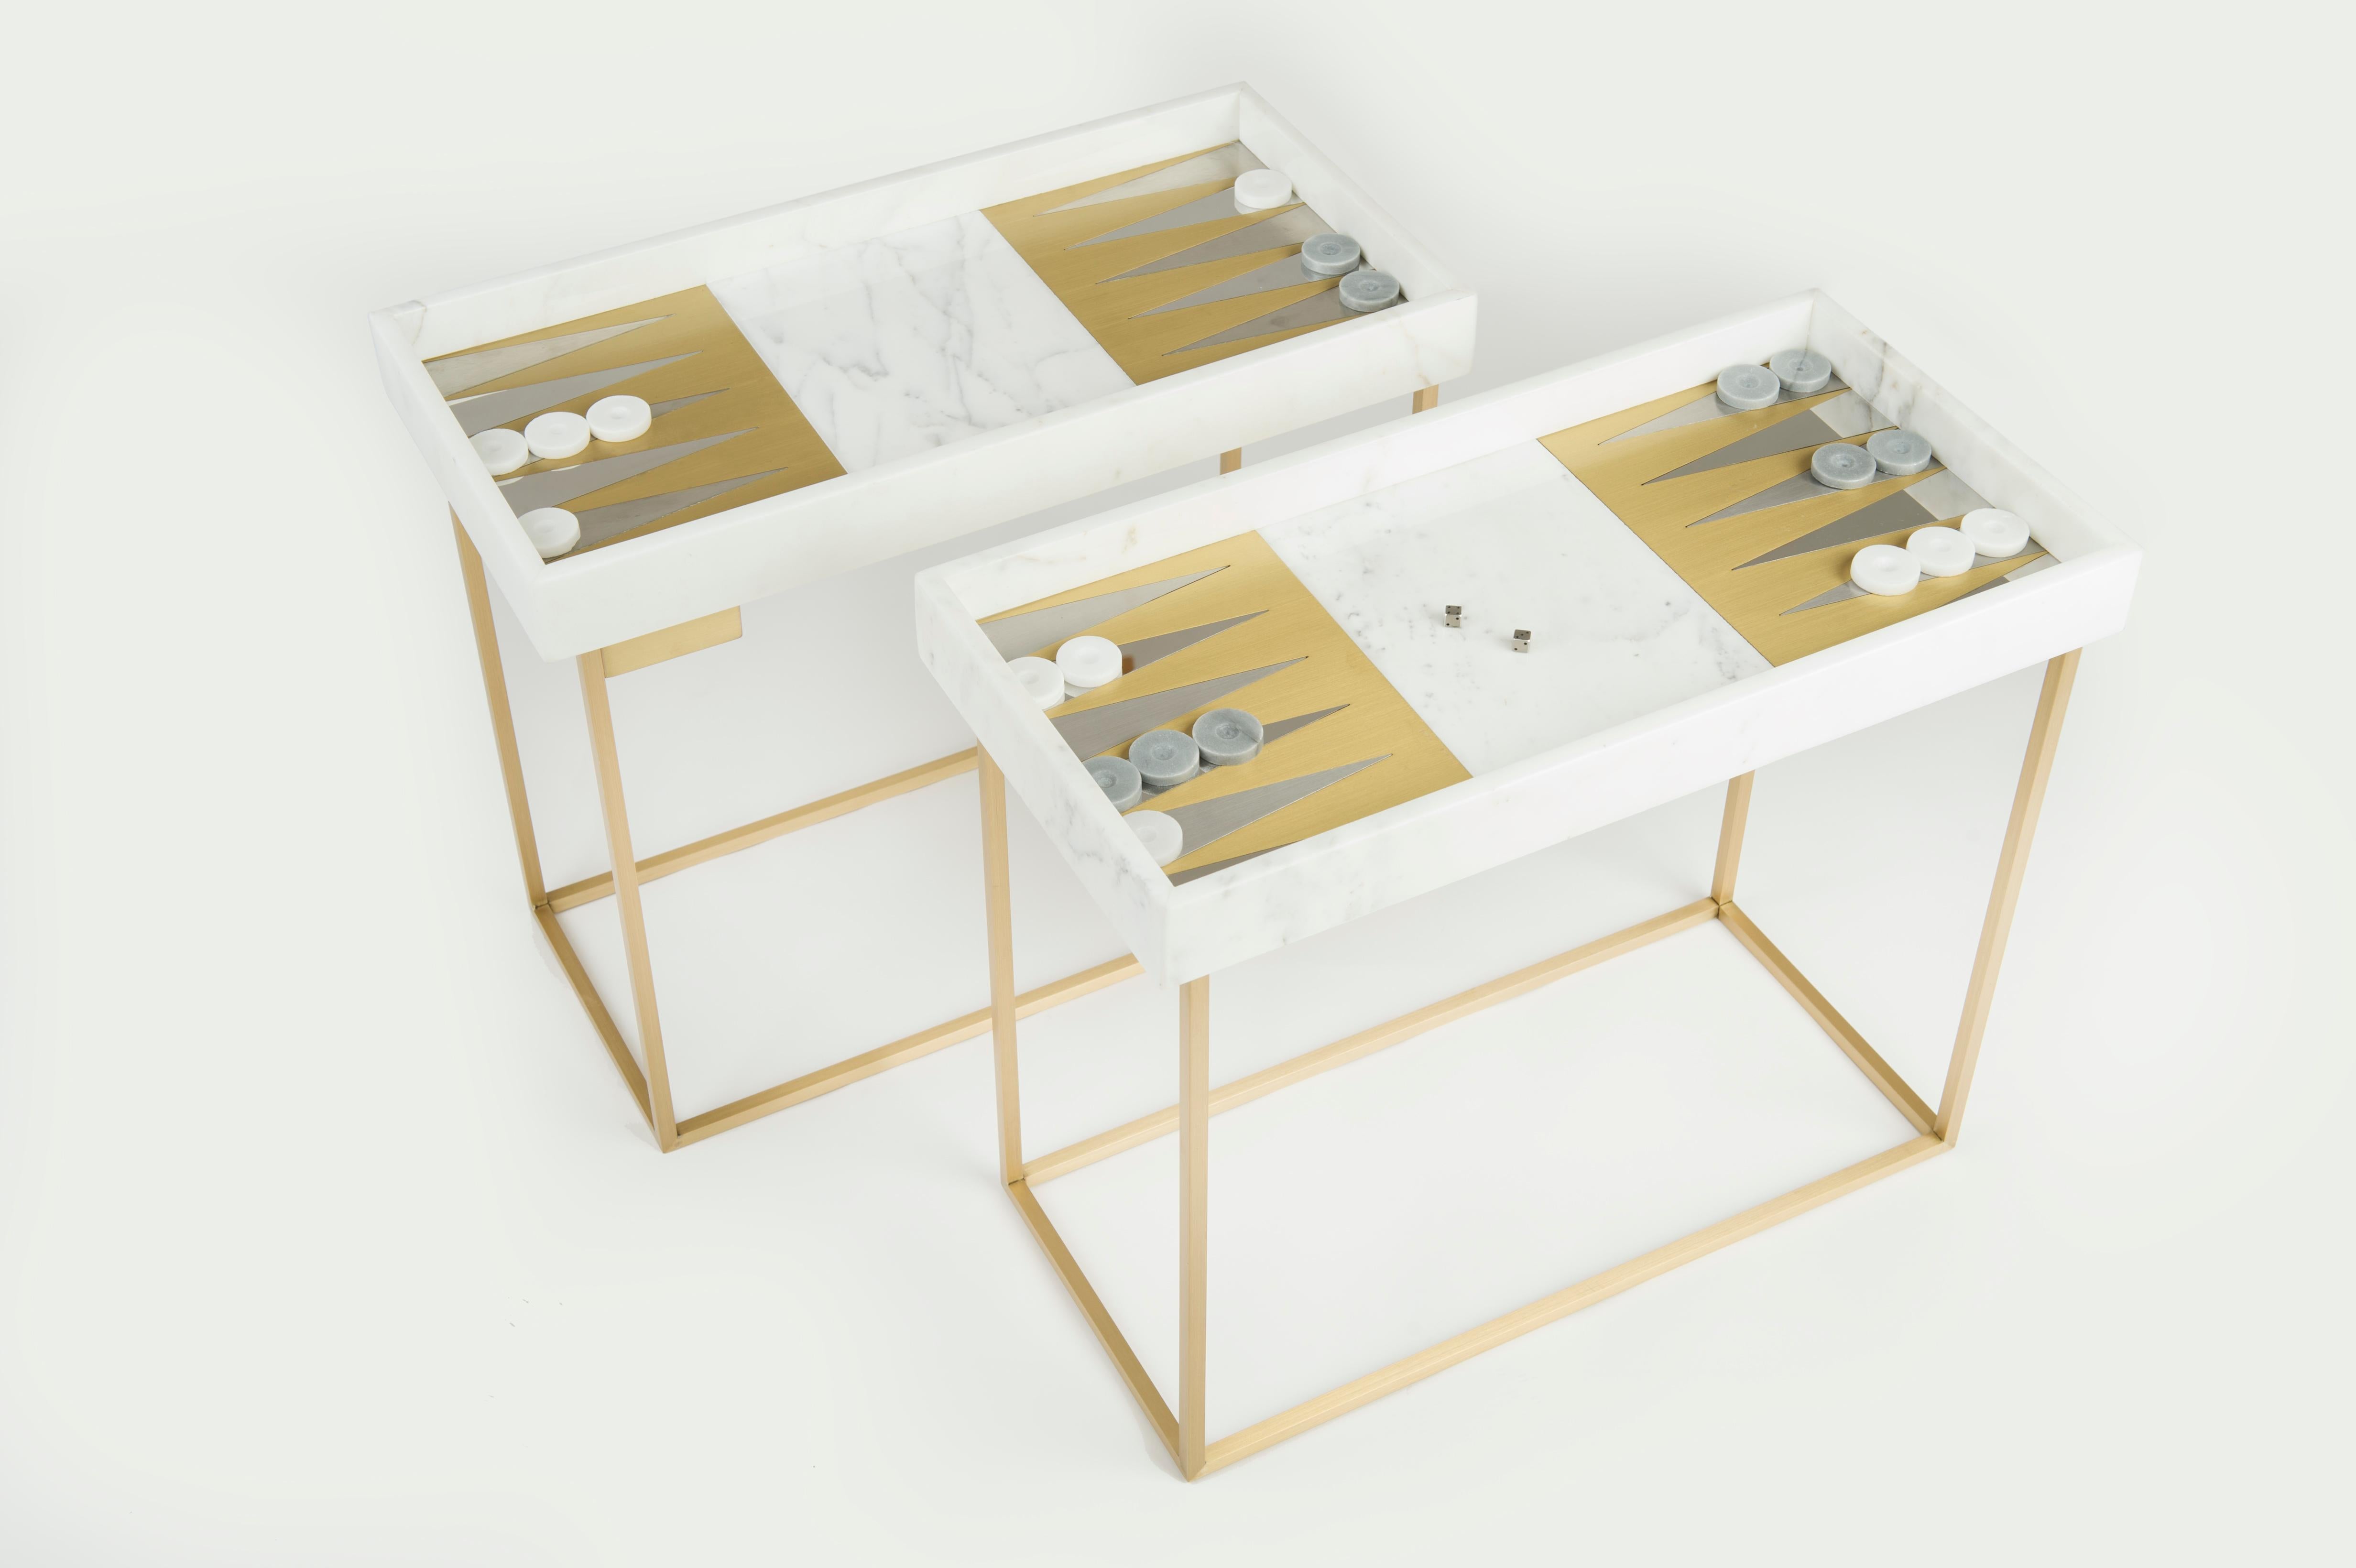 Play Backgammon table by Saccal Design House
Dimensions: L 49 x W 23 x H 45cm
Materials: Carrara and Brass
The marble in the Play Backgammon Table is Statuario marble mixed with brass and stainless steel. The playing chips are made of Carrara and